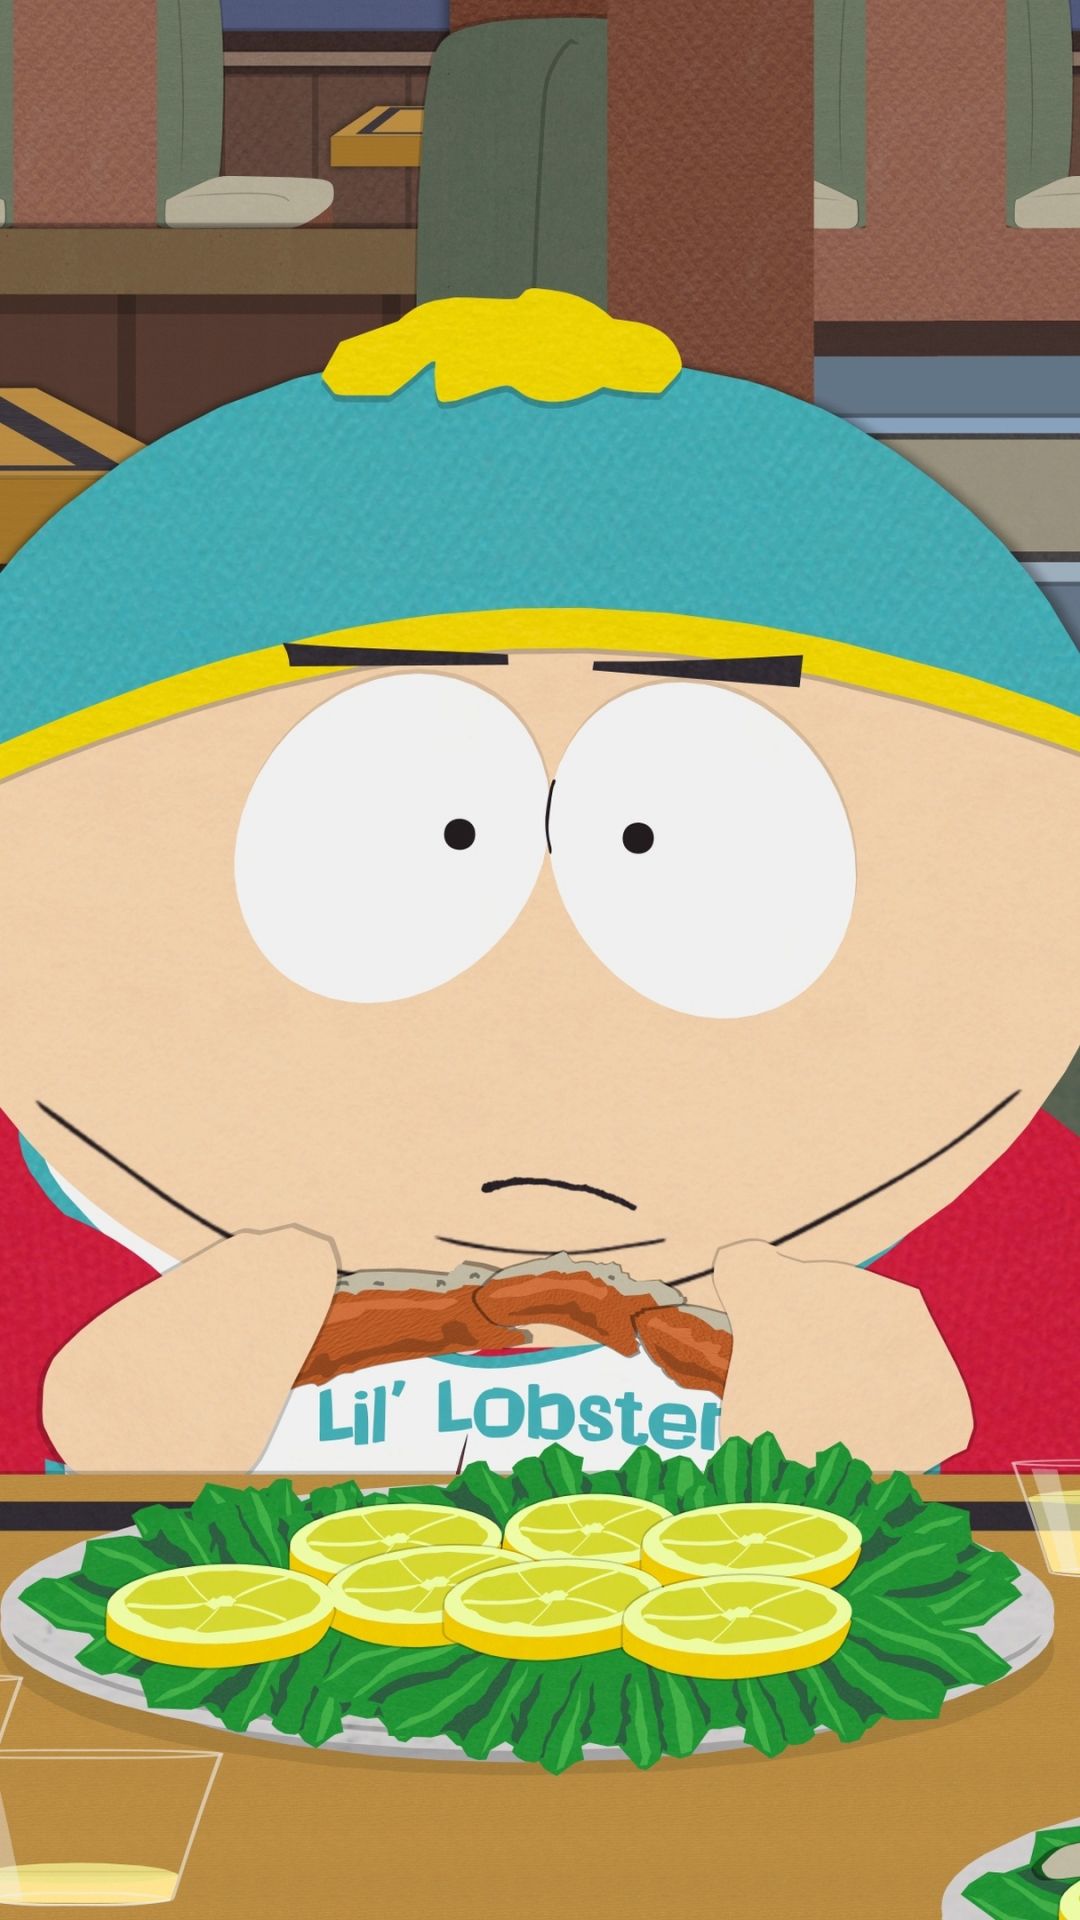 iPhone 5 - TV Show/South Park - Wallpaper ID: 588554